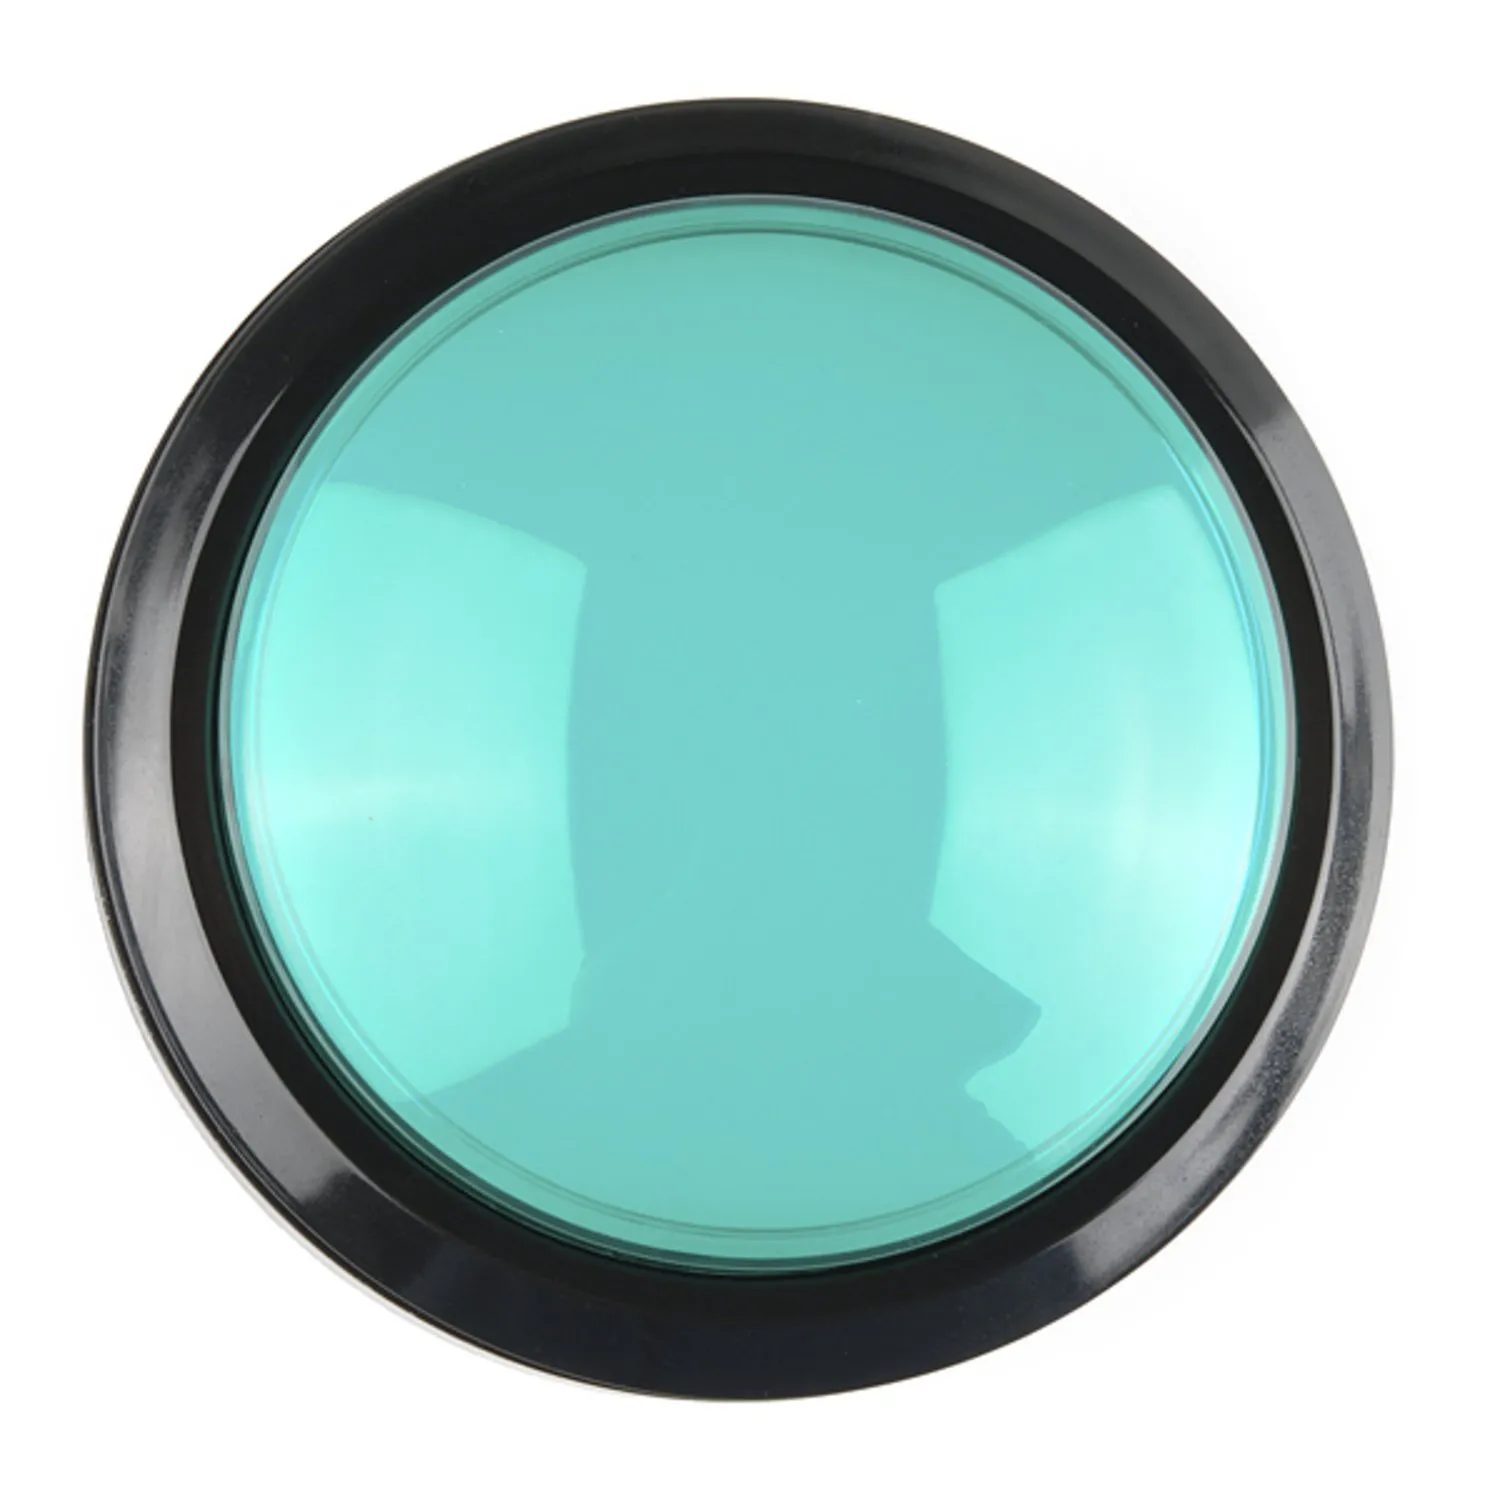 Photo of Big Dome Pushbutton - Green